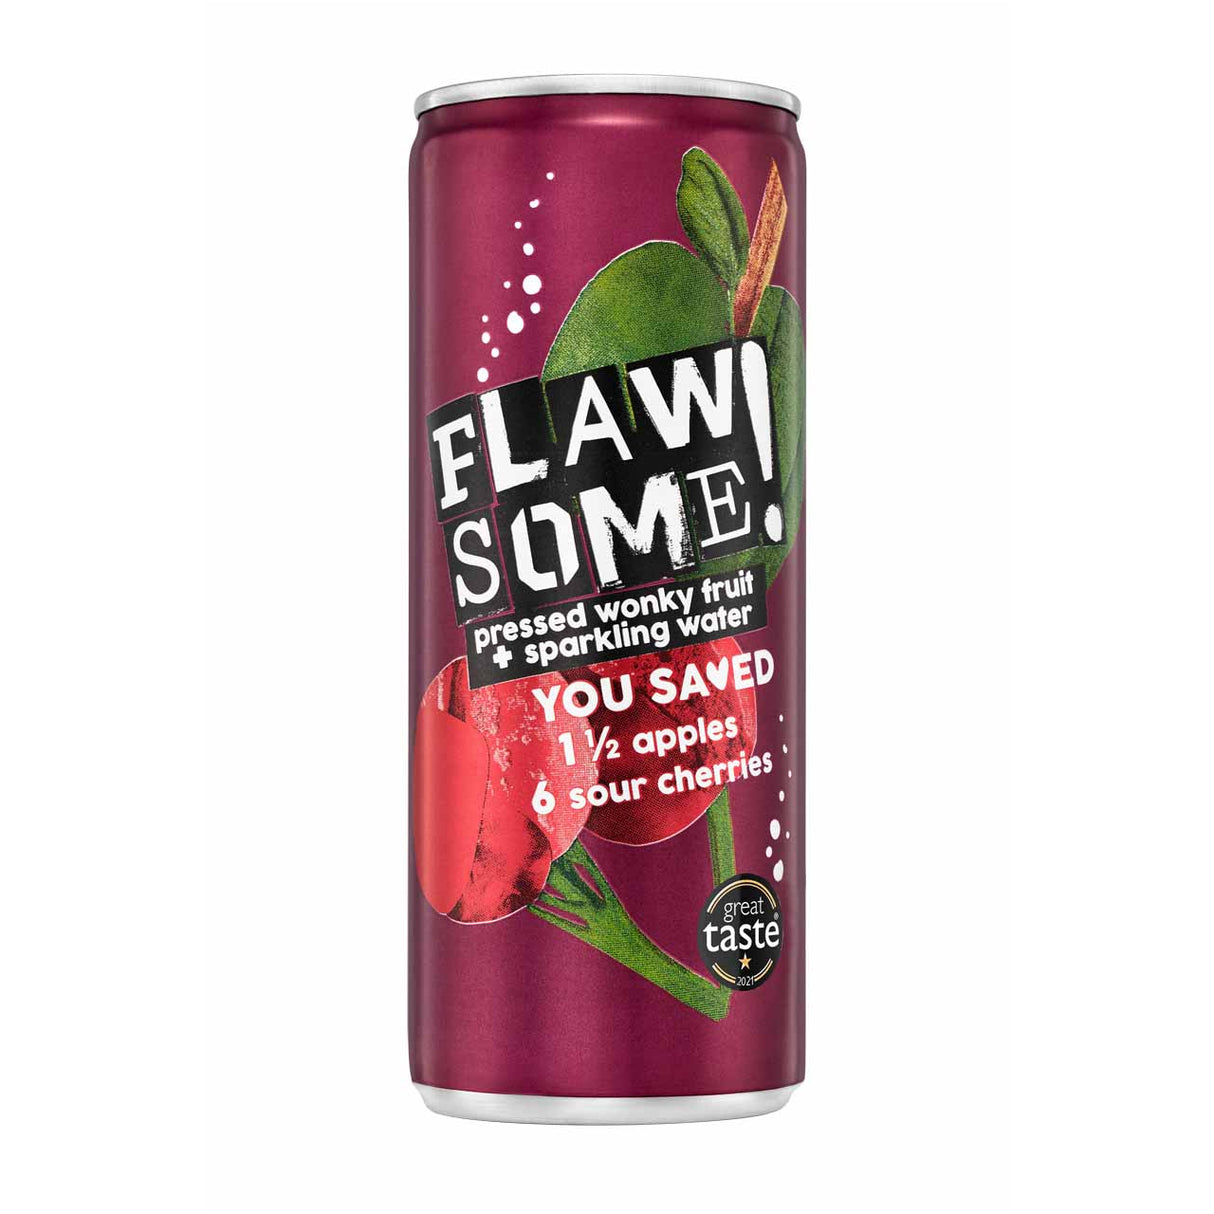 FLAWSOME! DRINKS APPLE & SOUR CHERRY SPARKLING CANS (250ml) x 24